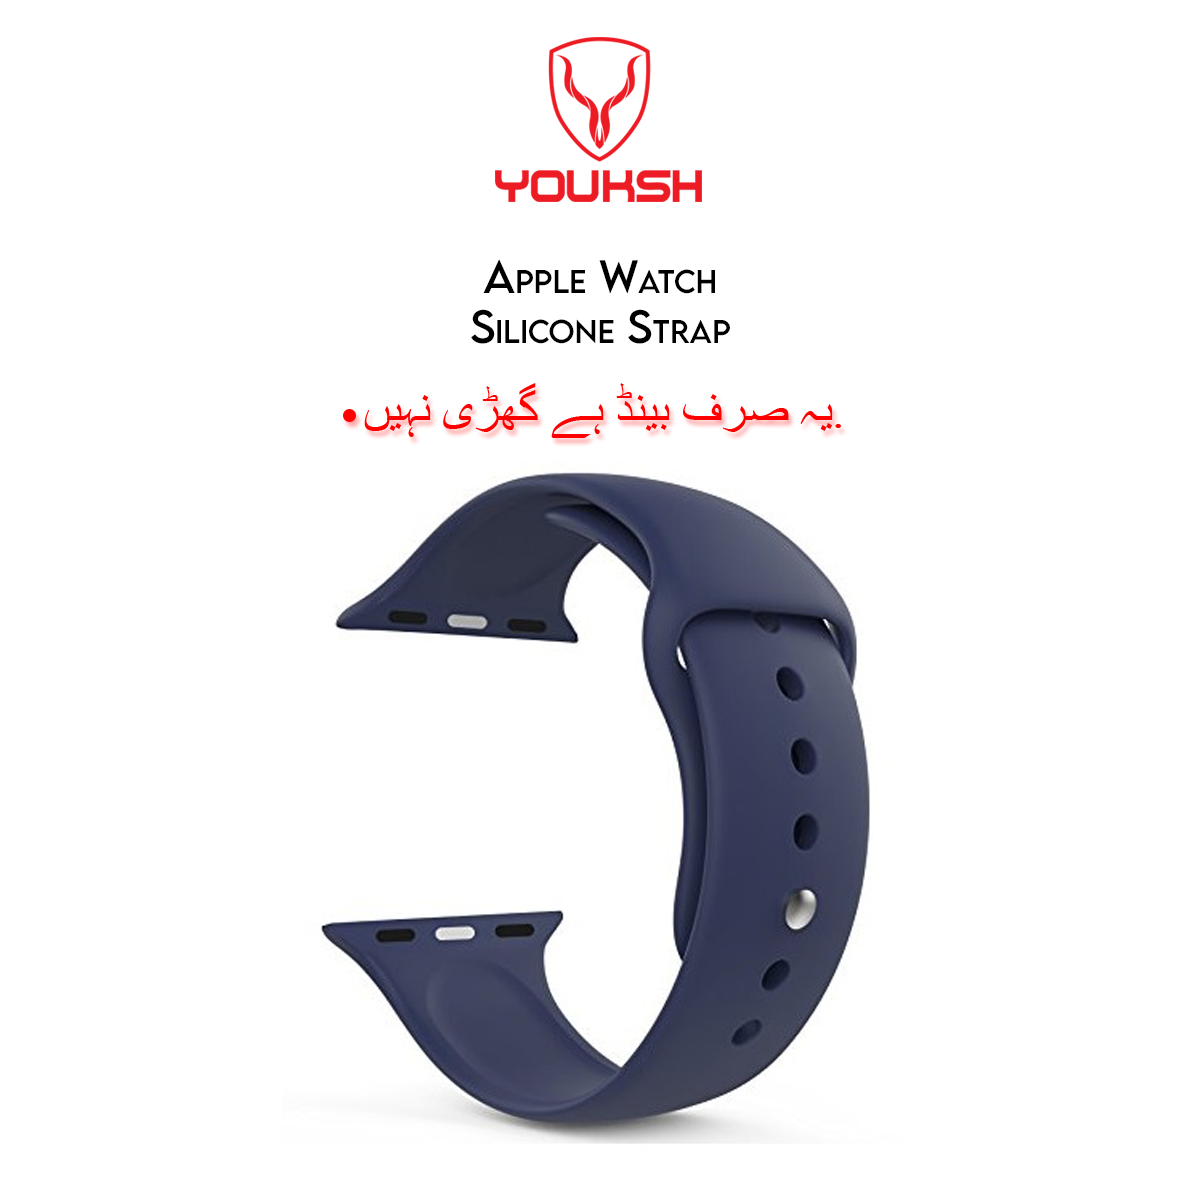 YOUKSH - Apple Watch 42mm/44mm Silicone Strap - 42mm/44mm Silicone Strap - 42mm/44mm Silicone Band Strap - For Apple Series - 1/2/3/4/5/6.